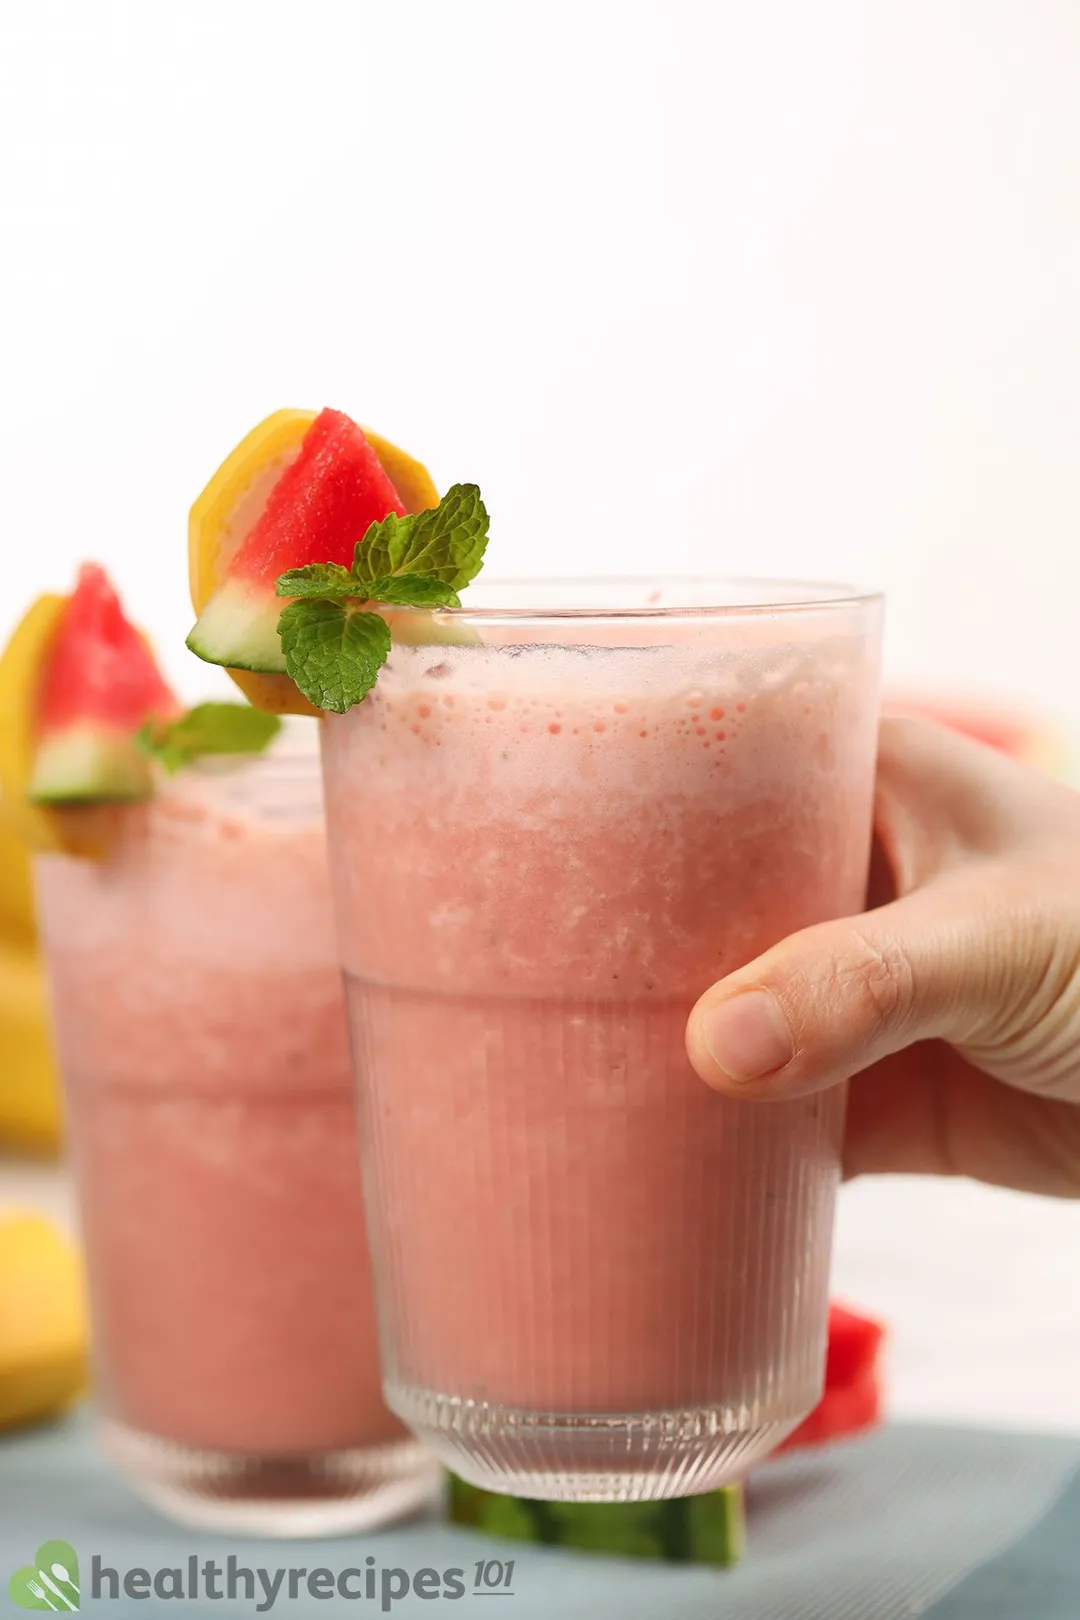 A hand picking up a glass of Watermelon Banana Smoothie placed in front of another identical glass.